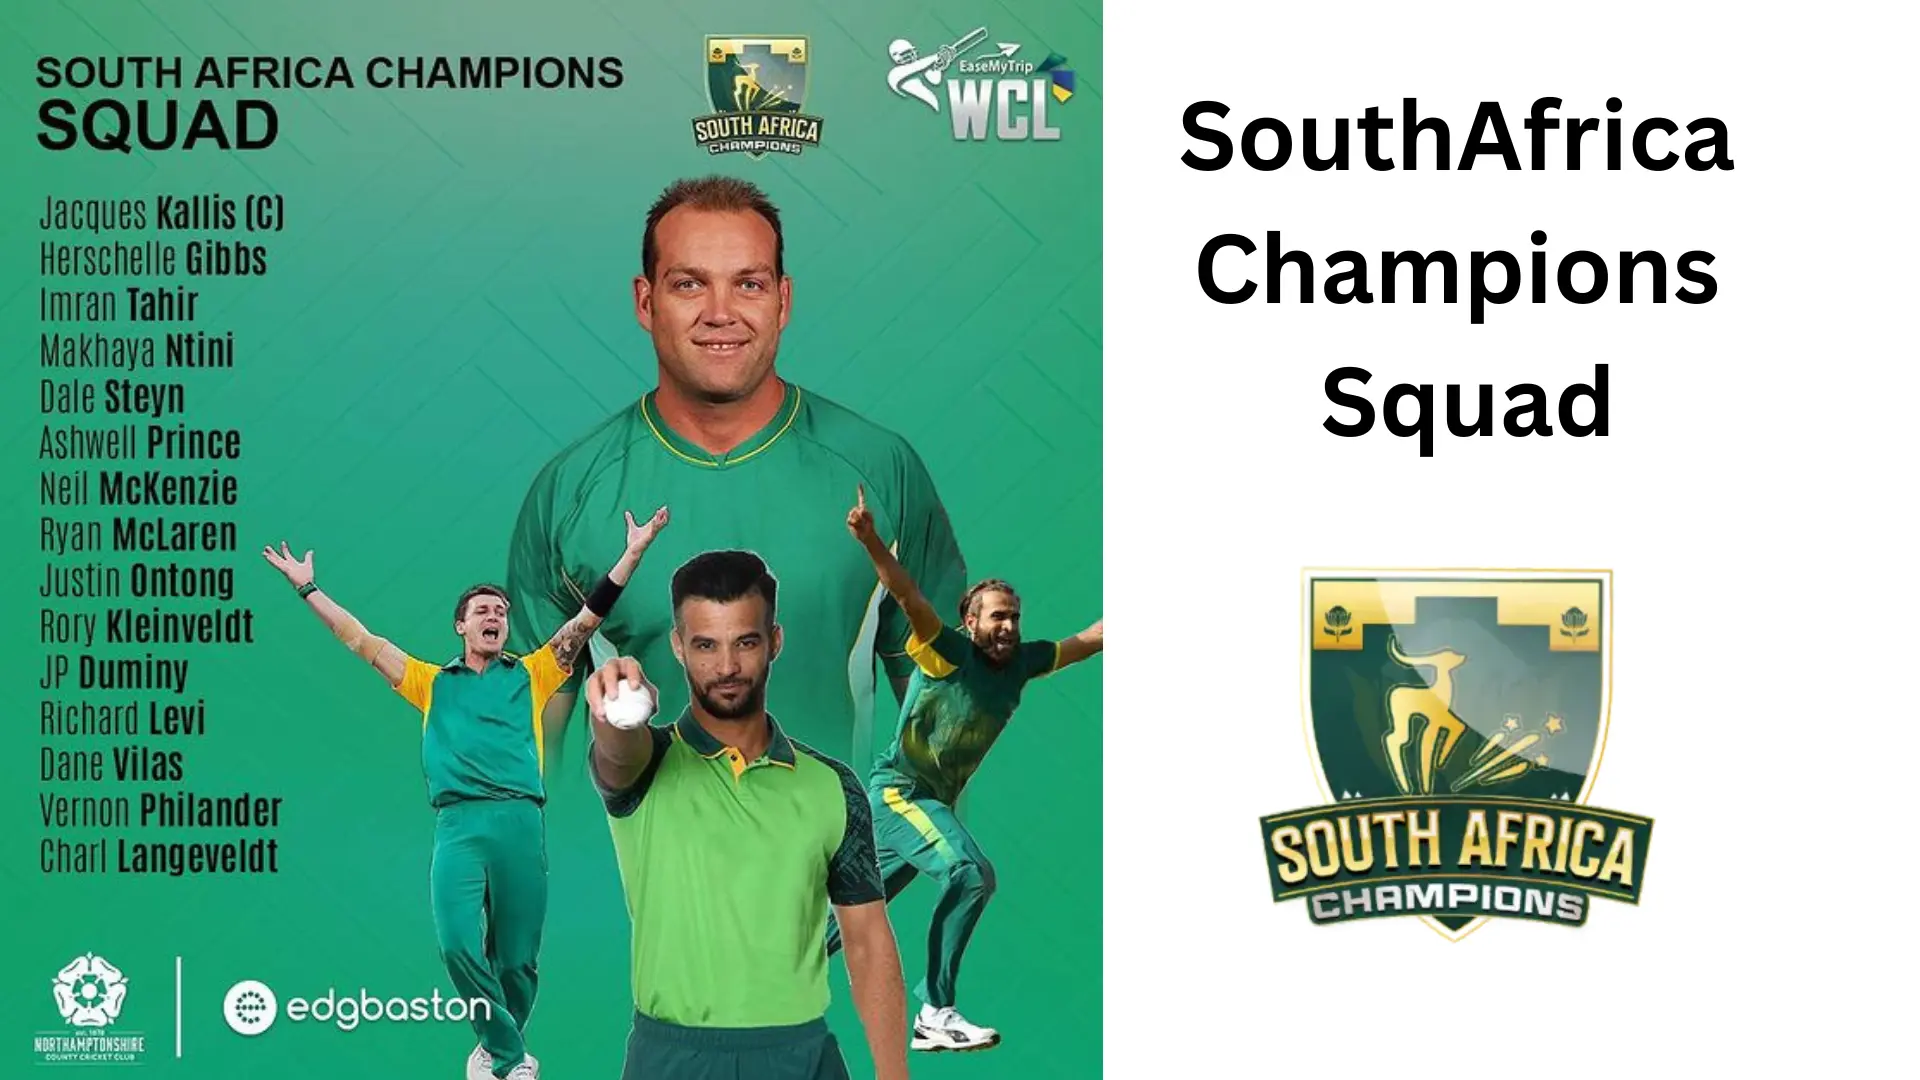 South Africa Champions Squad